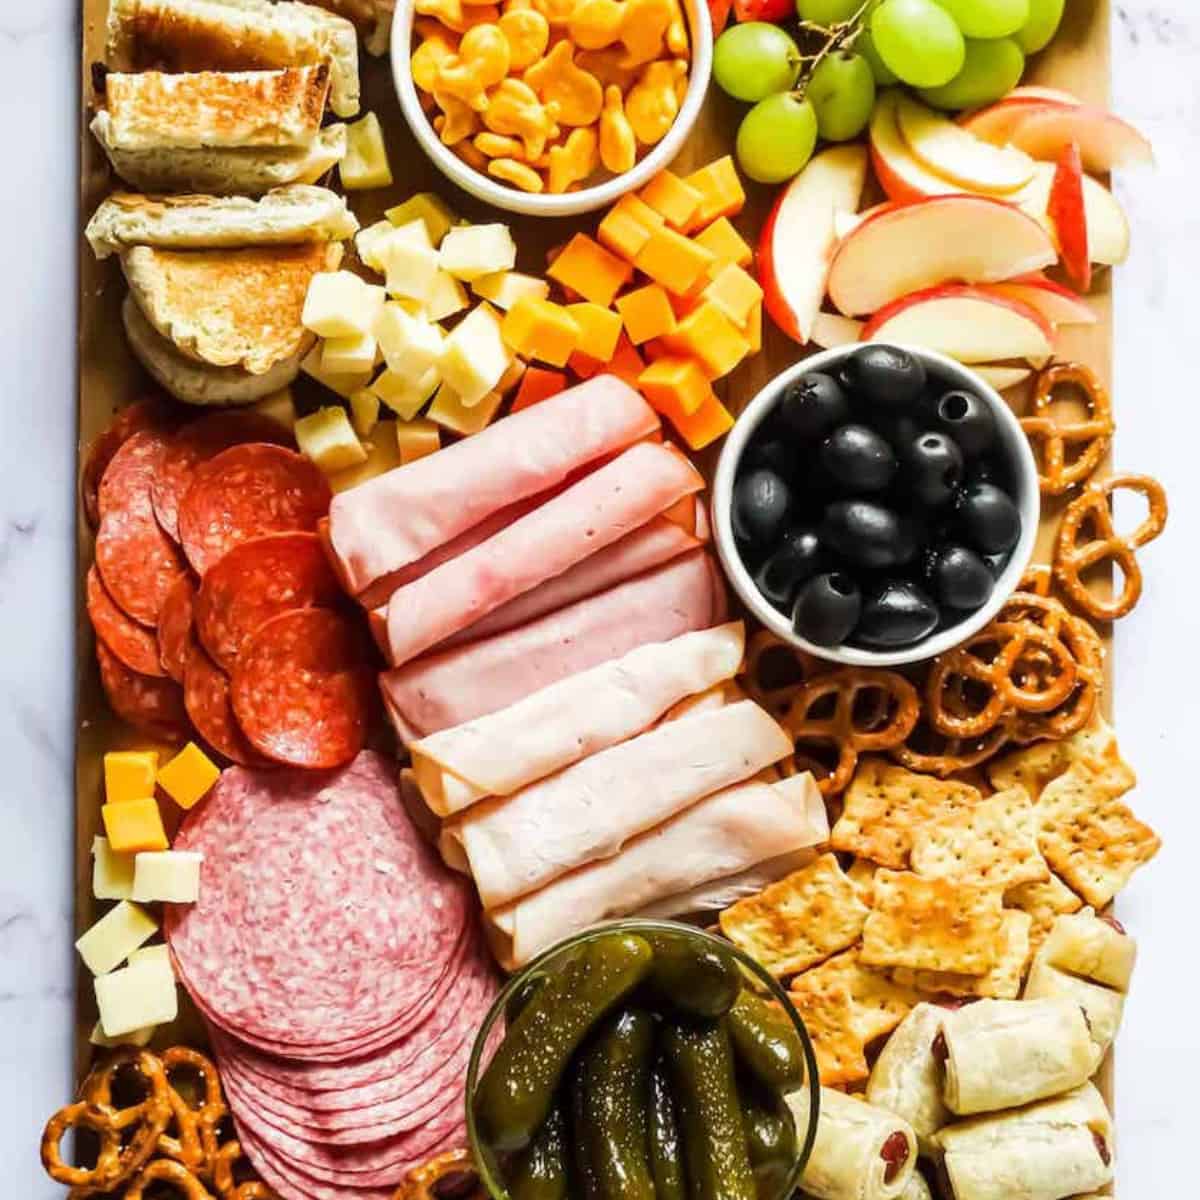 https://tastyoven.com/wp-content/uploads/2020/01/kid-friendly-charcuterie-board-featured-image.jpg